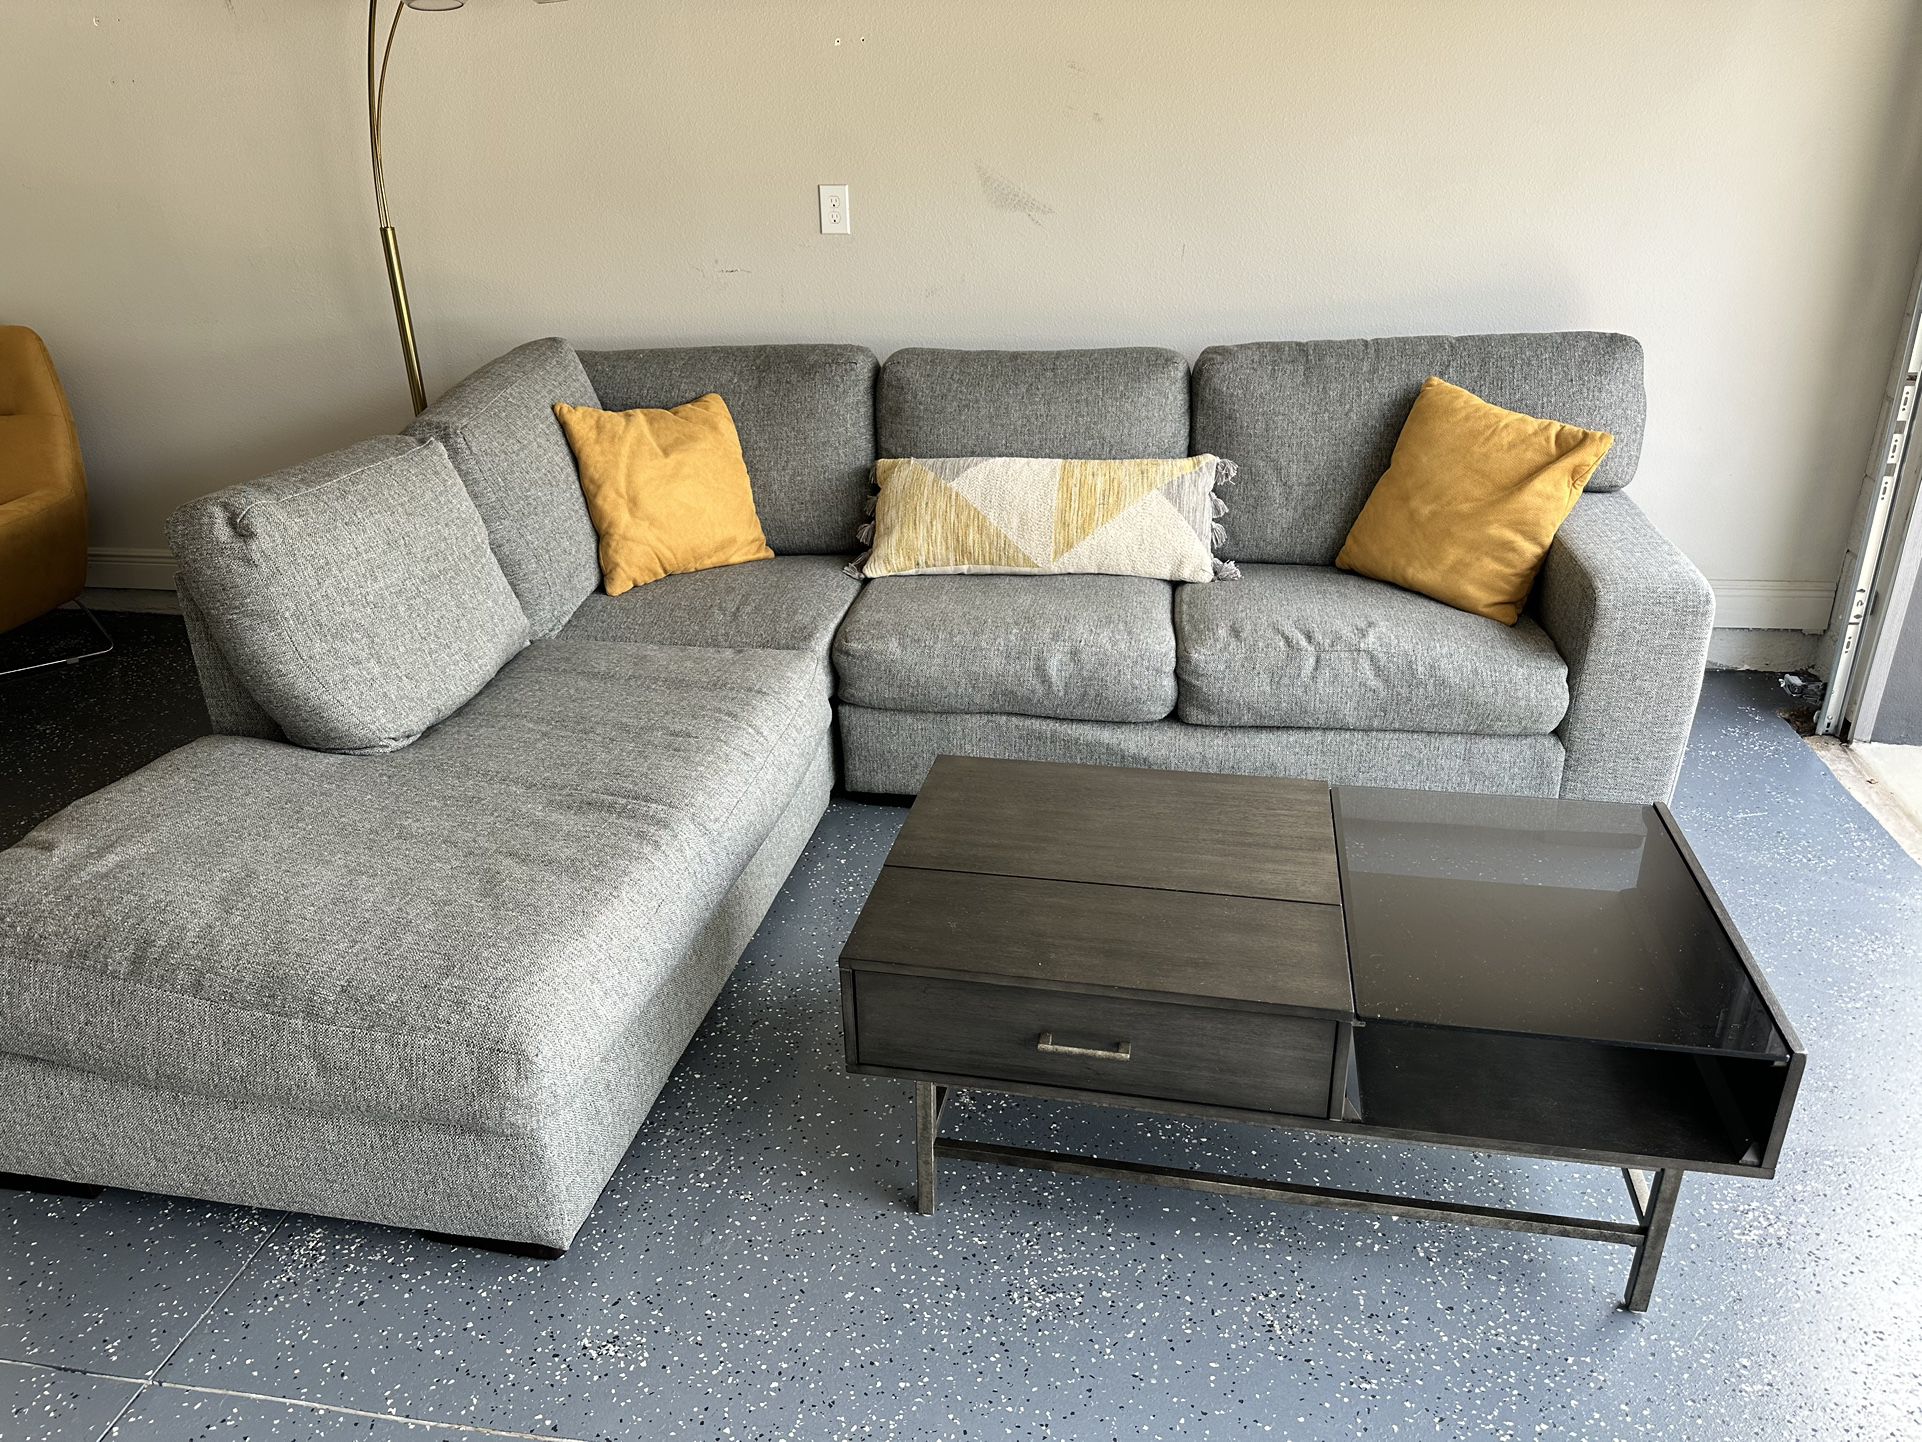 Grey Sectional with Decorative Pillows / SEND BEST OFFER